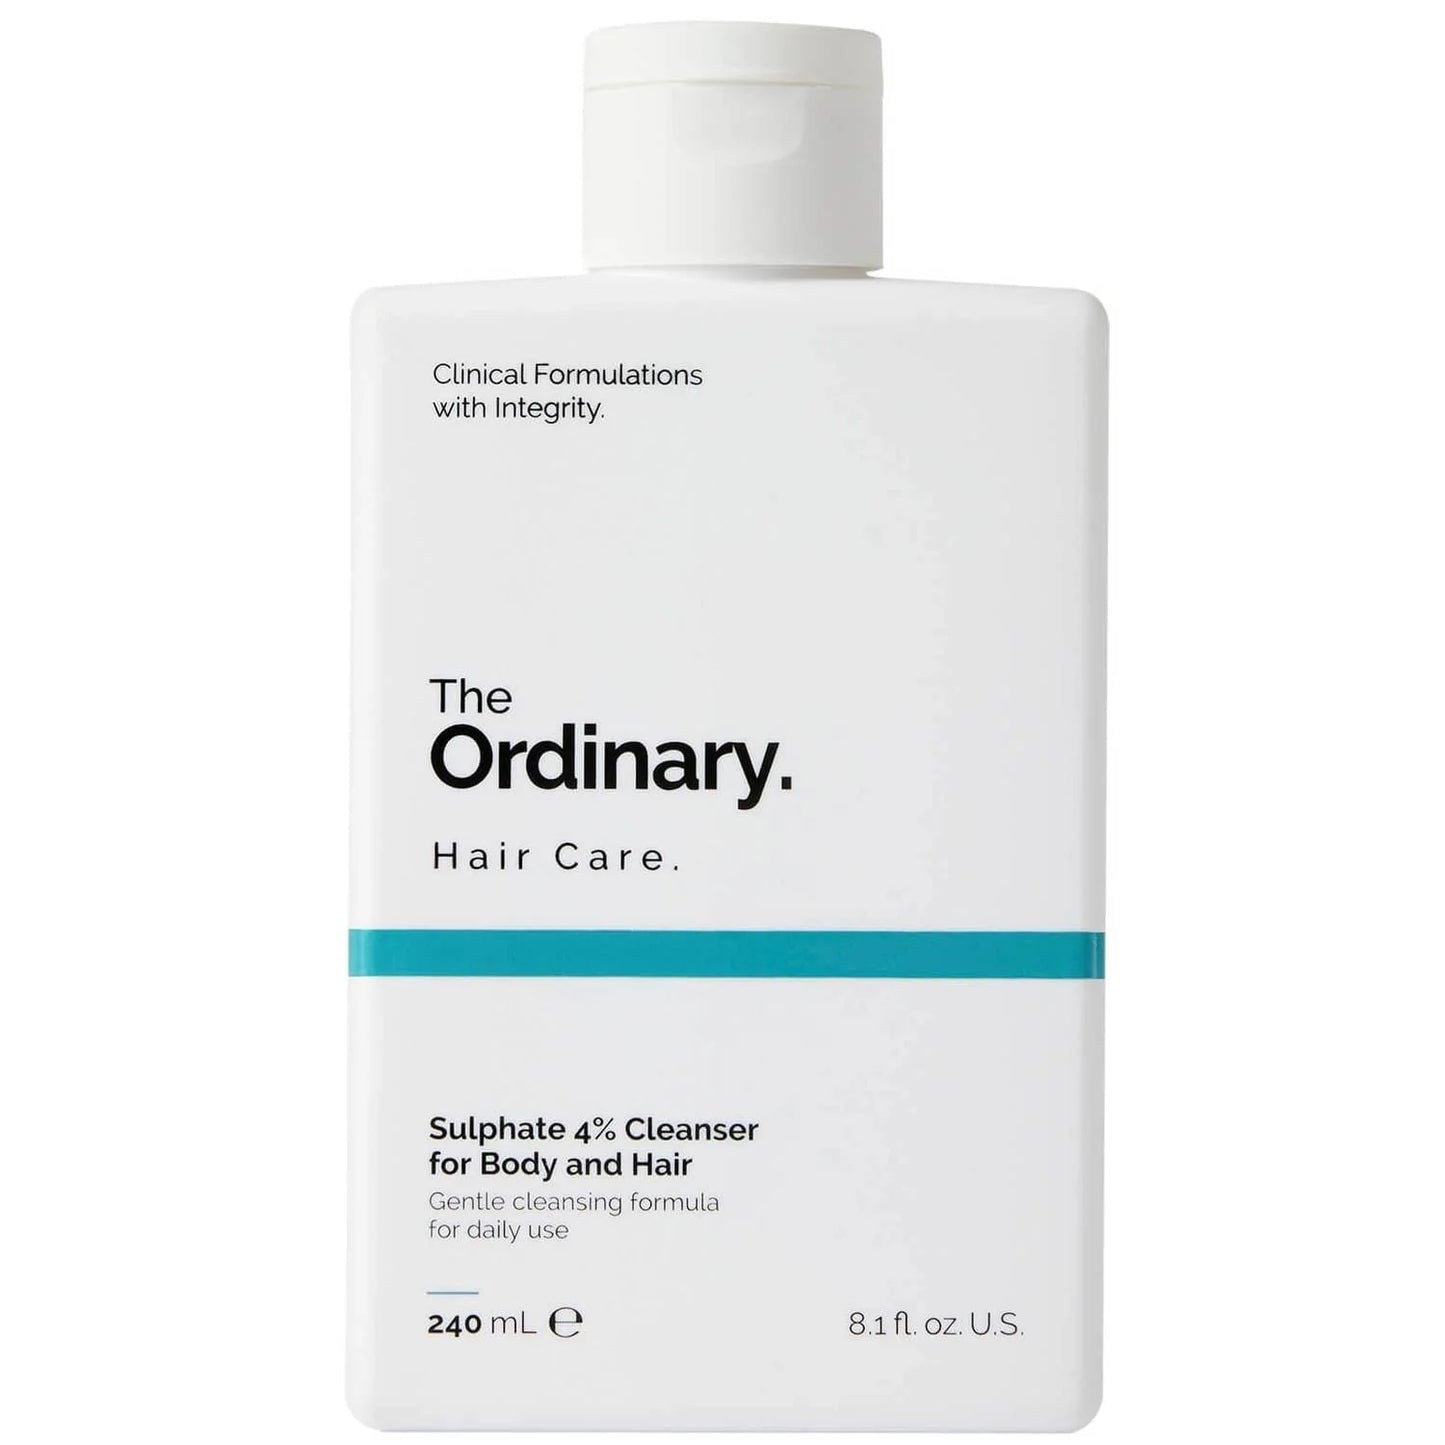 The Ordinary Beauty The Ordinary Sulphate 4% Cleanser for Body and Hair & Behentrimonium Chloride 2% Conditioner 240ml